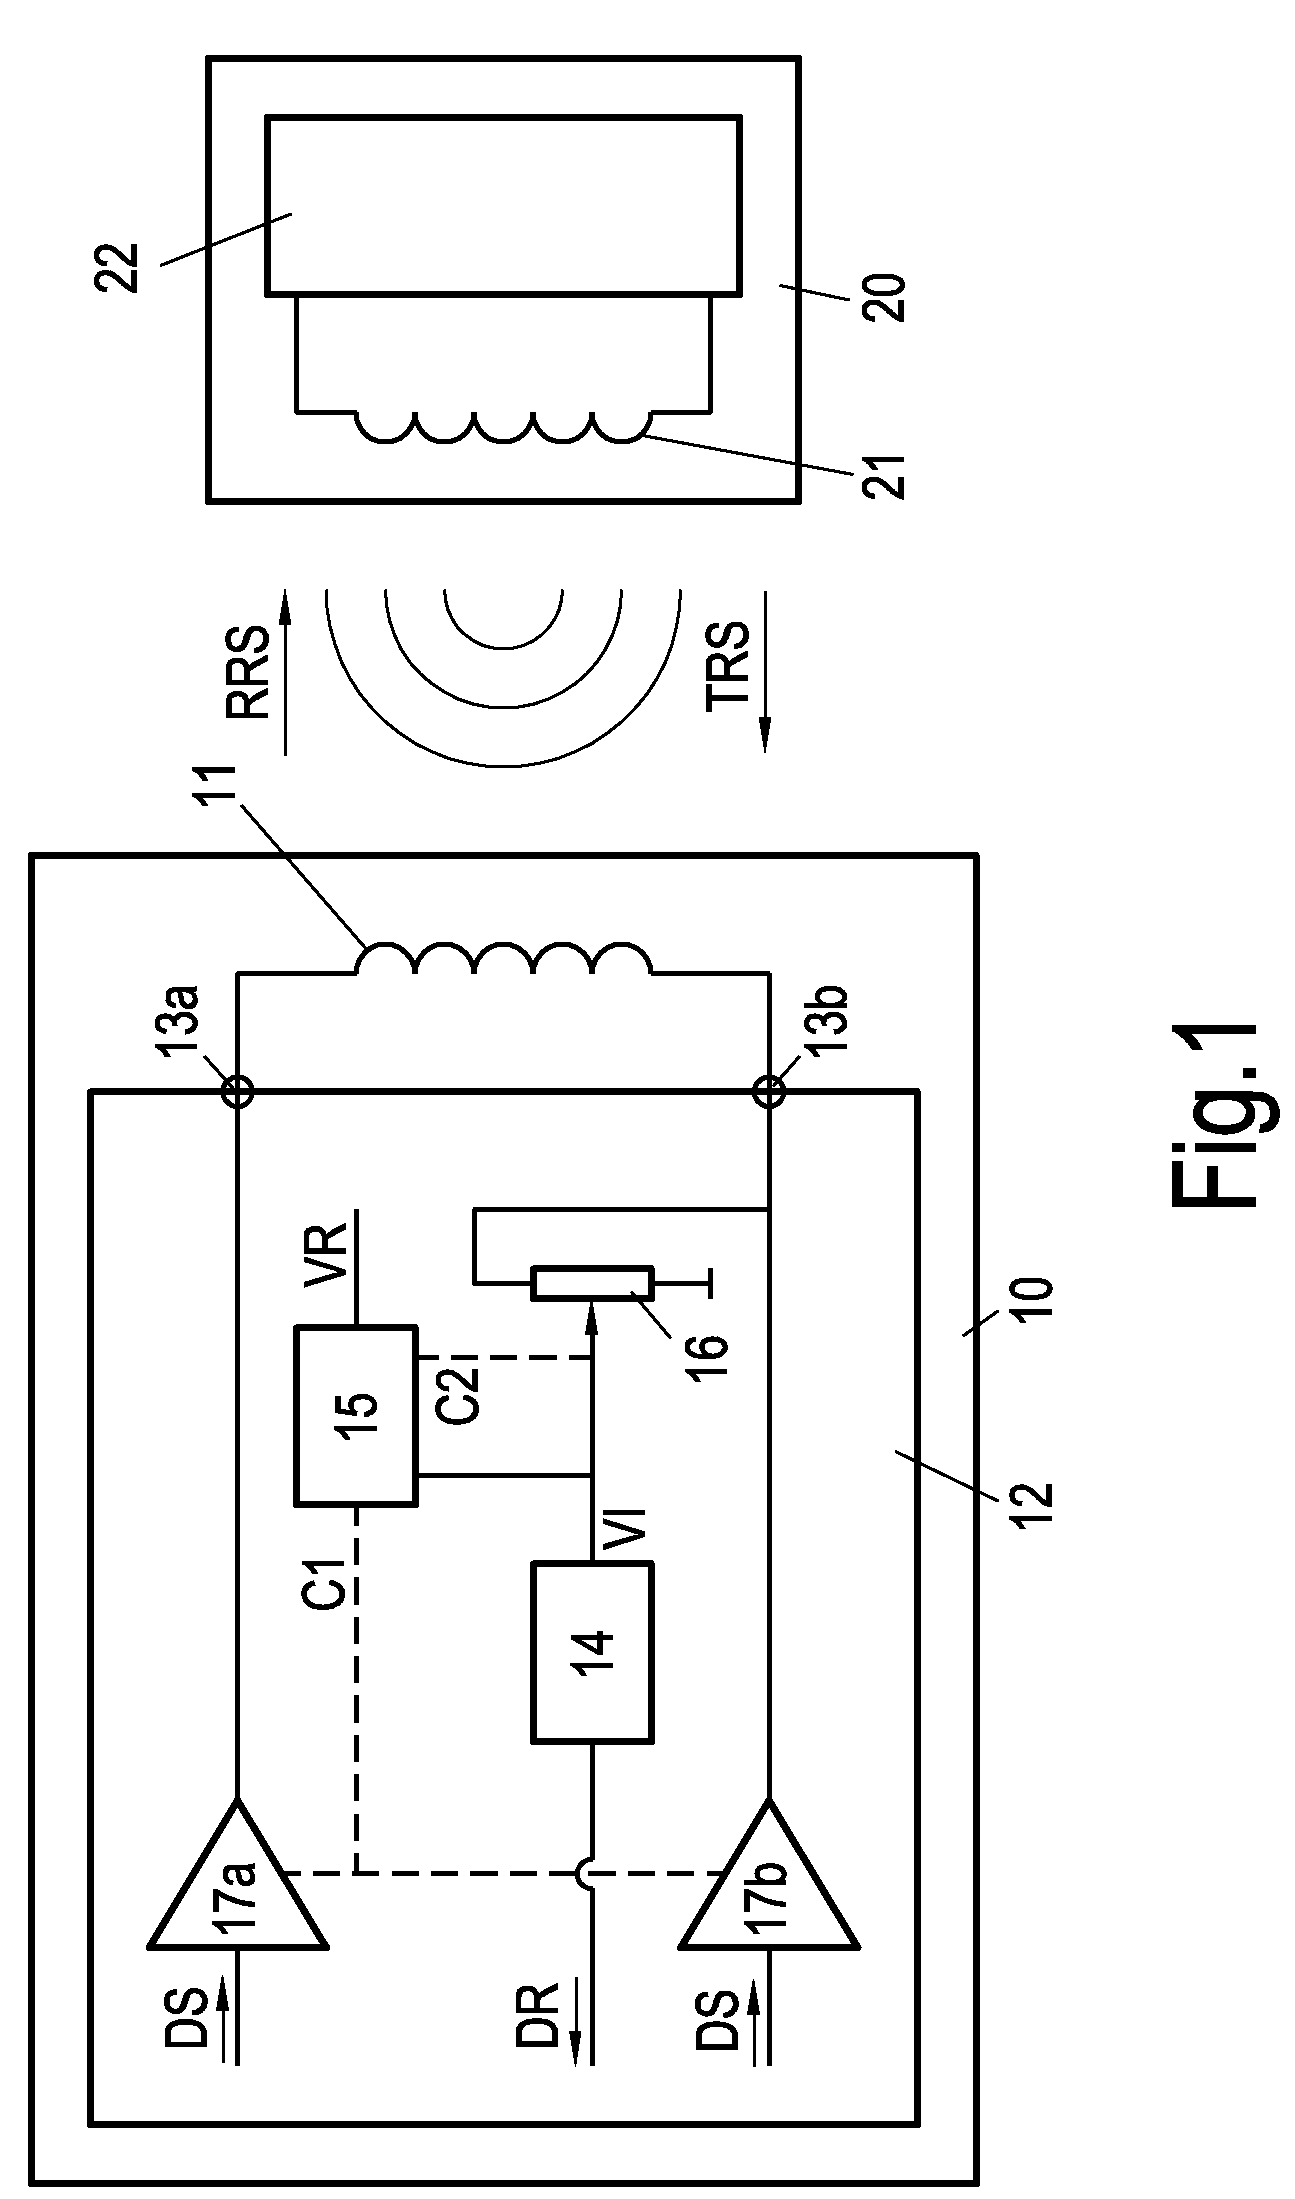 Electronic circuit for a contactless reader device